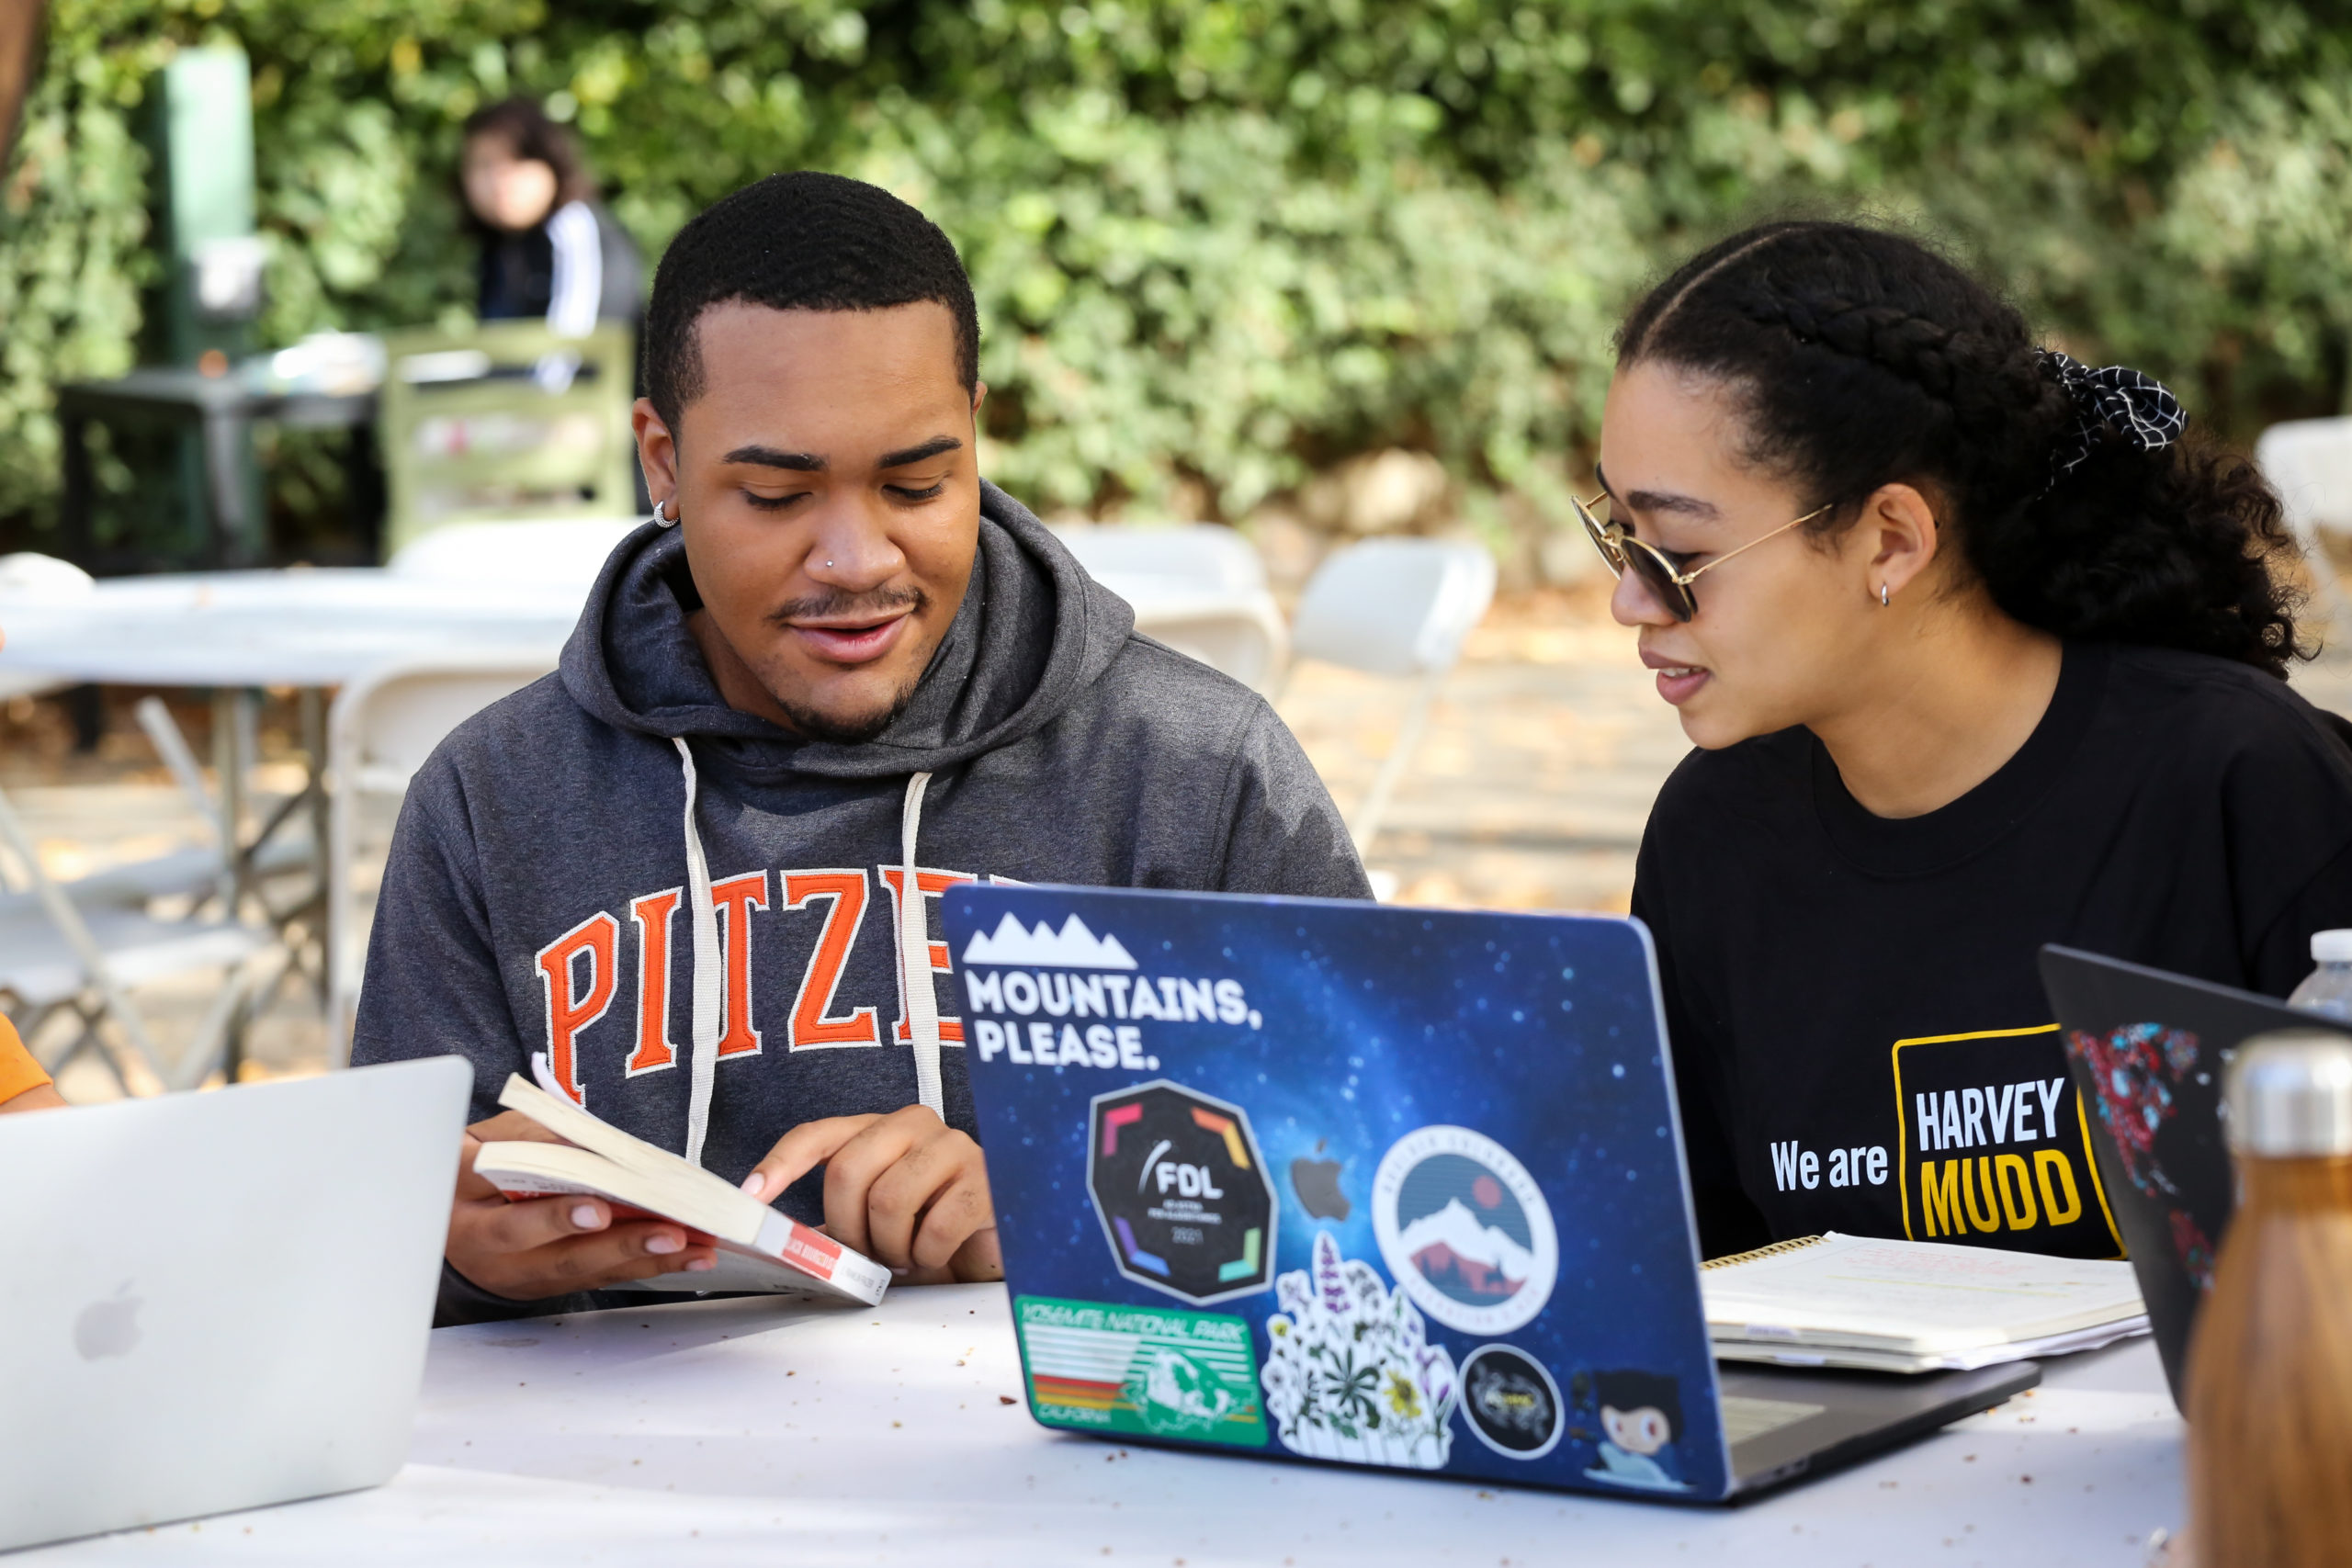 Two students sitting outdoors looking at book with laptops open.